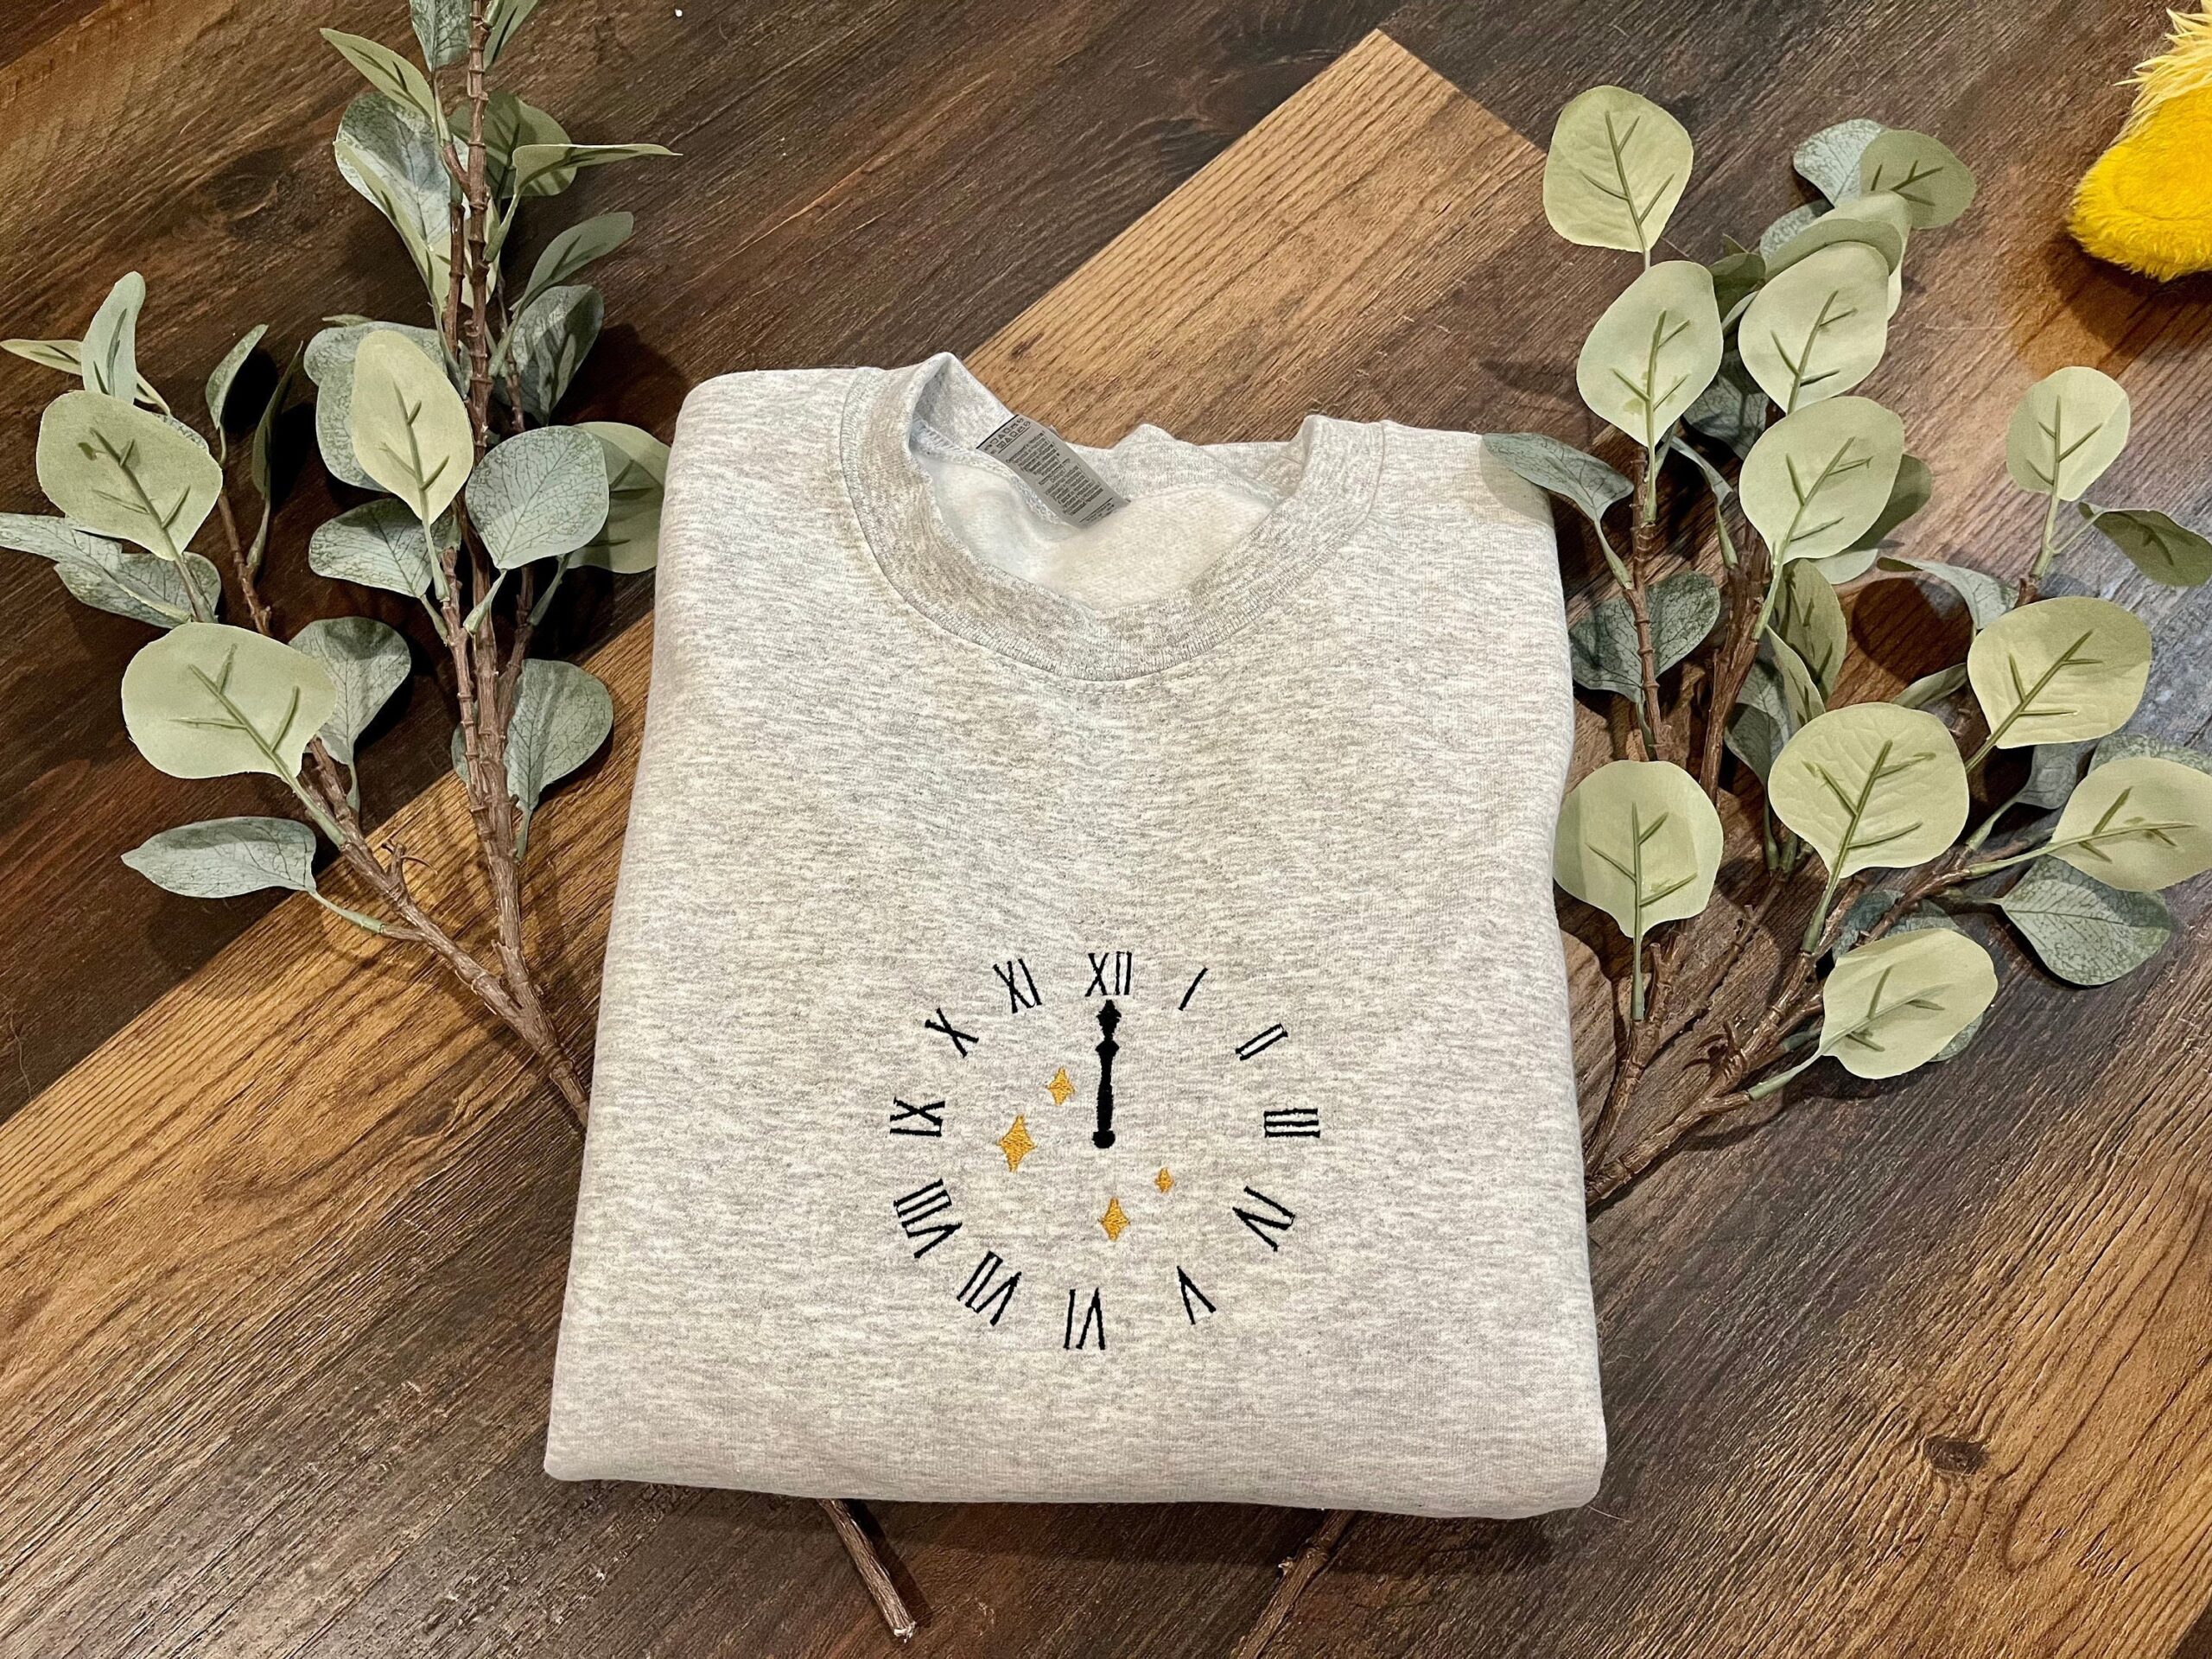 Stunning Embroidered Crewneck Inspired by Taylor Swift - Shop Now!